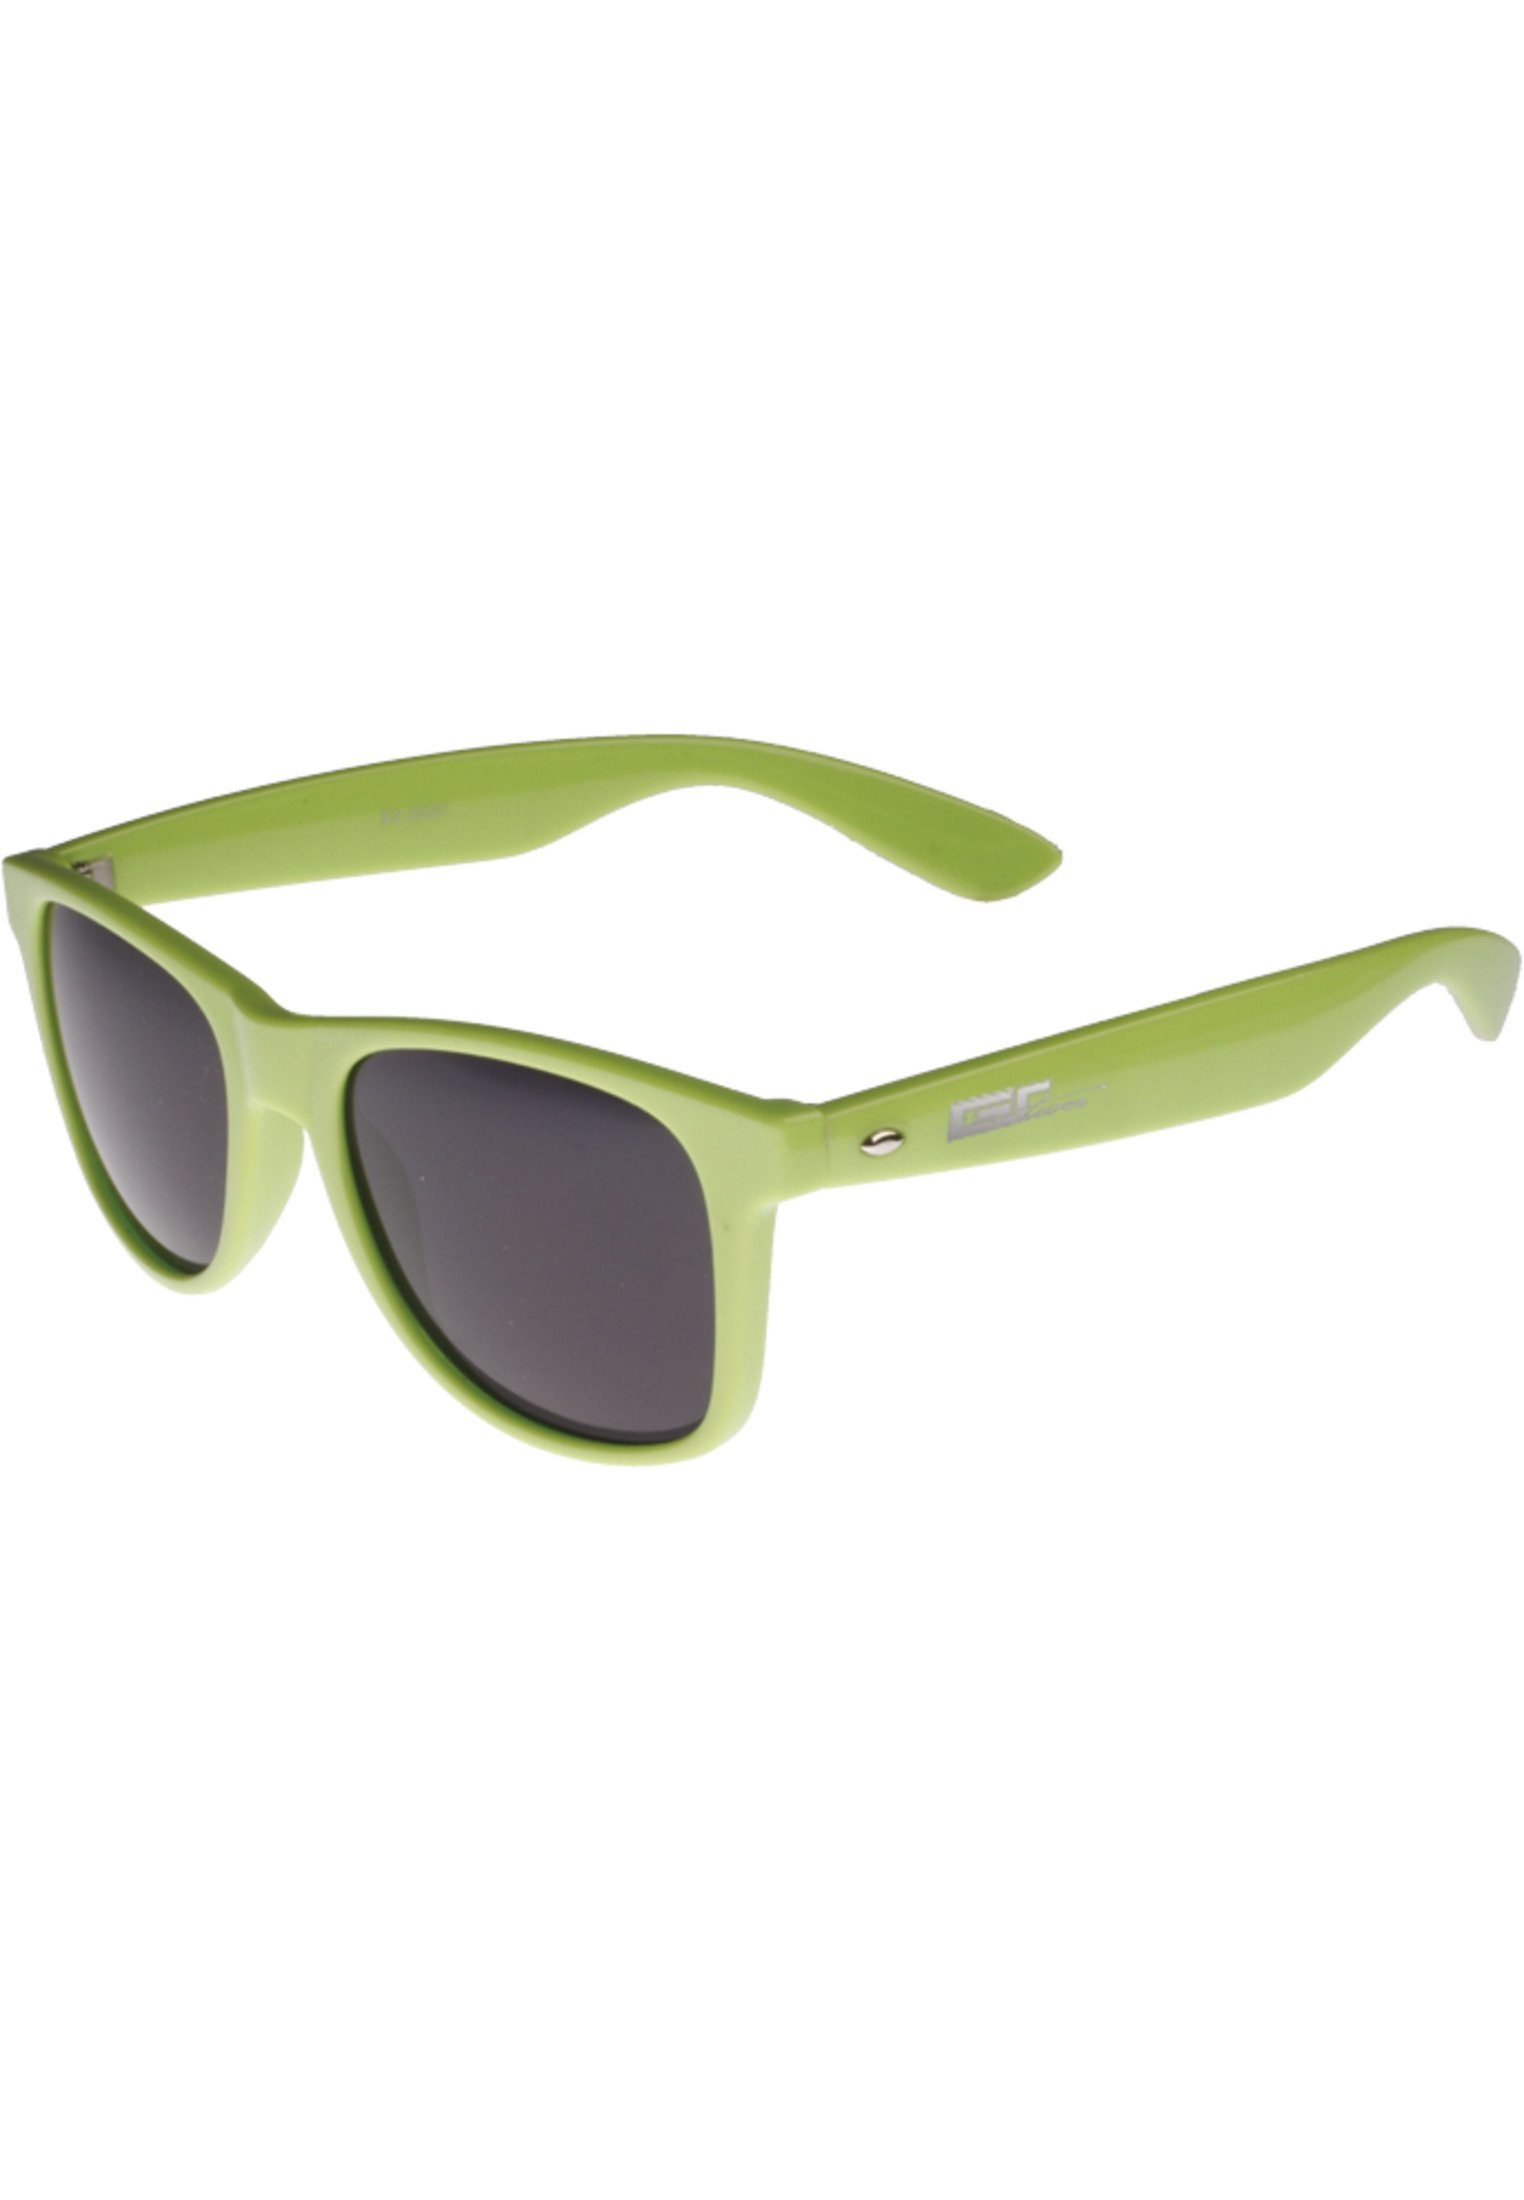 limegreen Groove Shades GStwo Sonnenbrille MSTRDS Accessoires